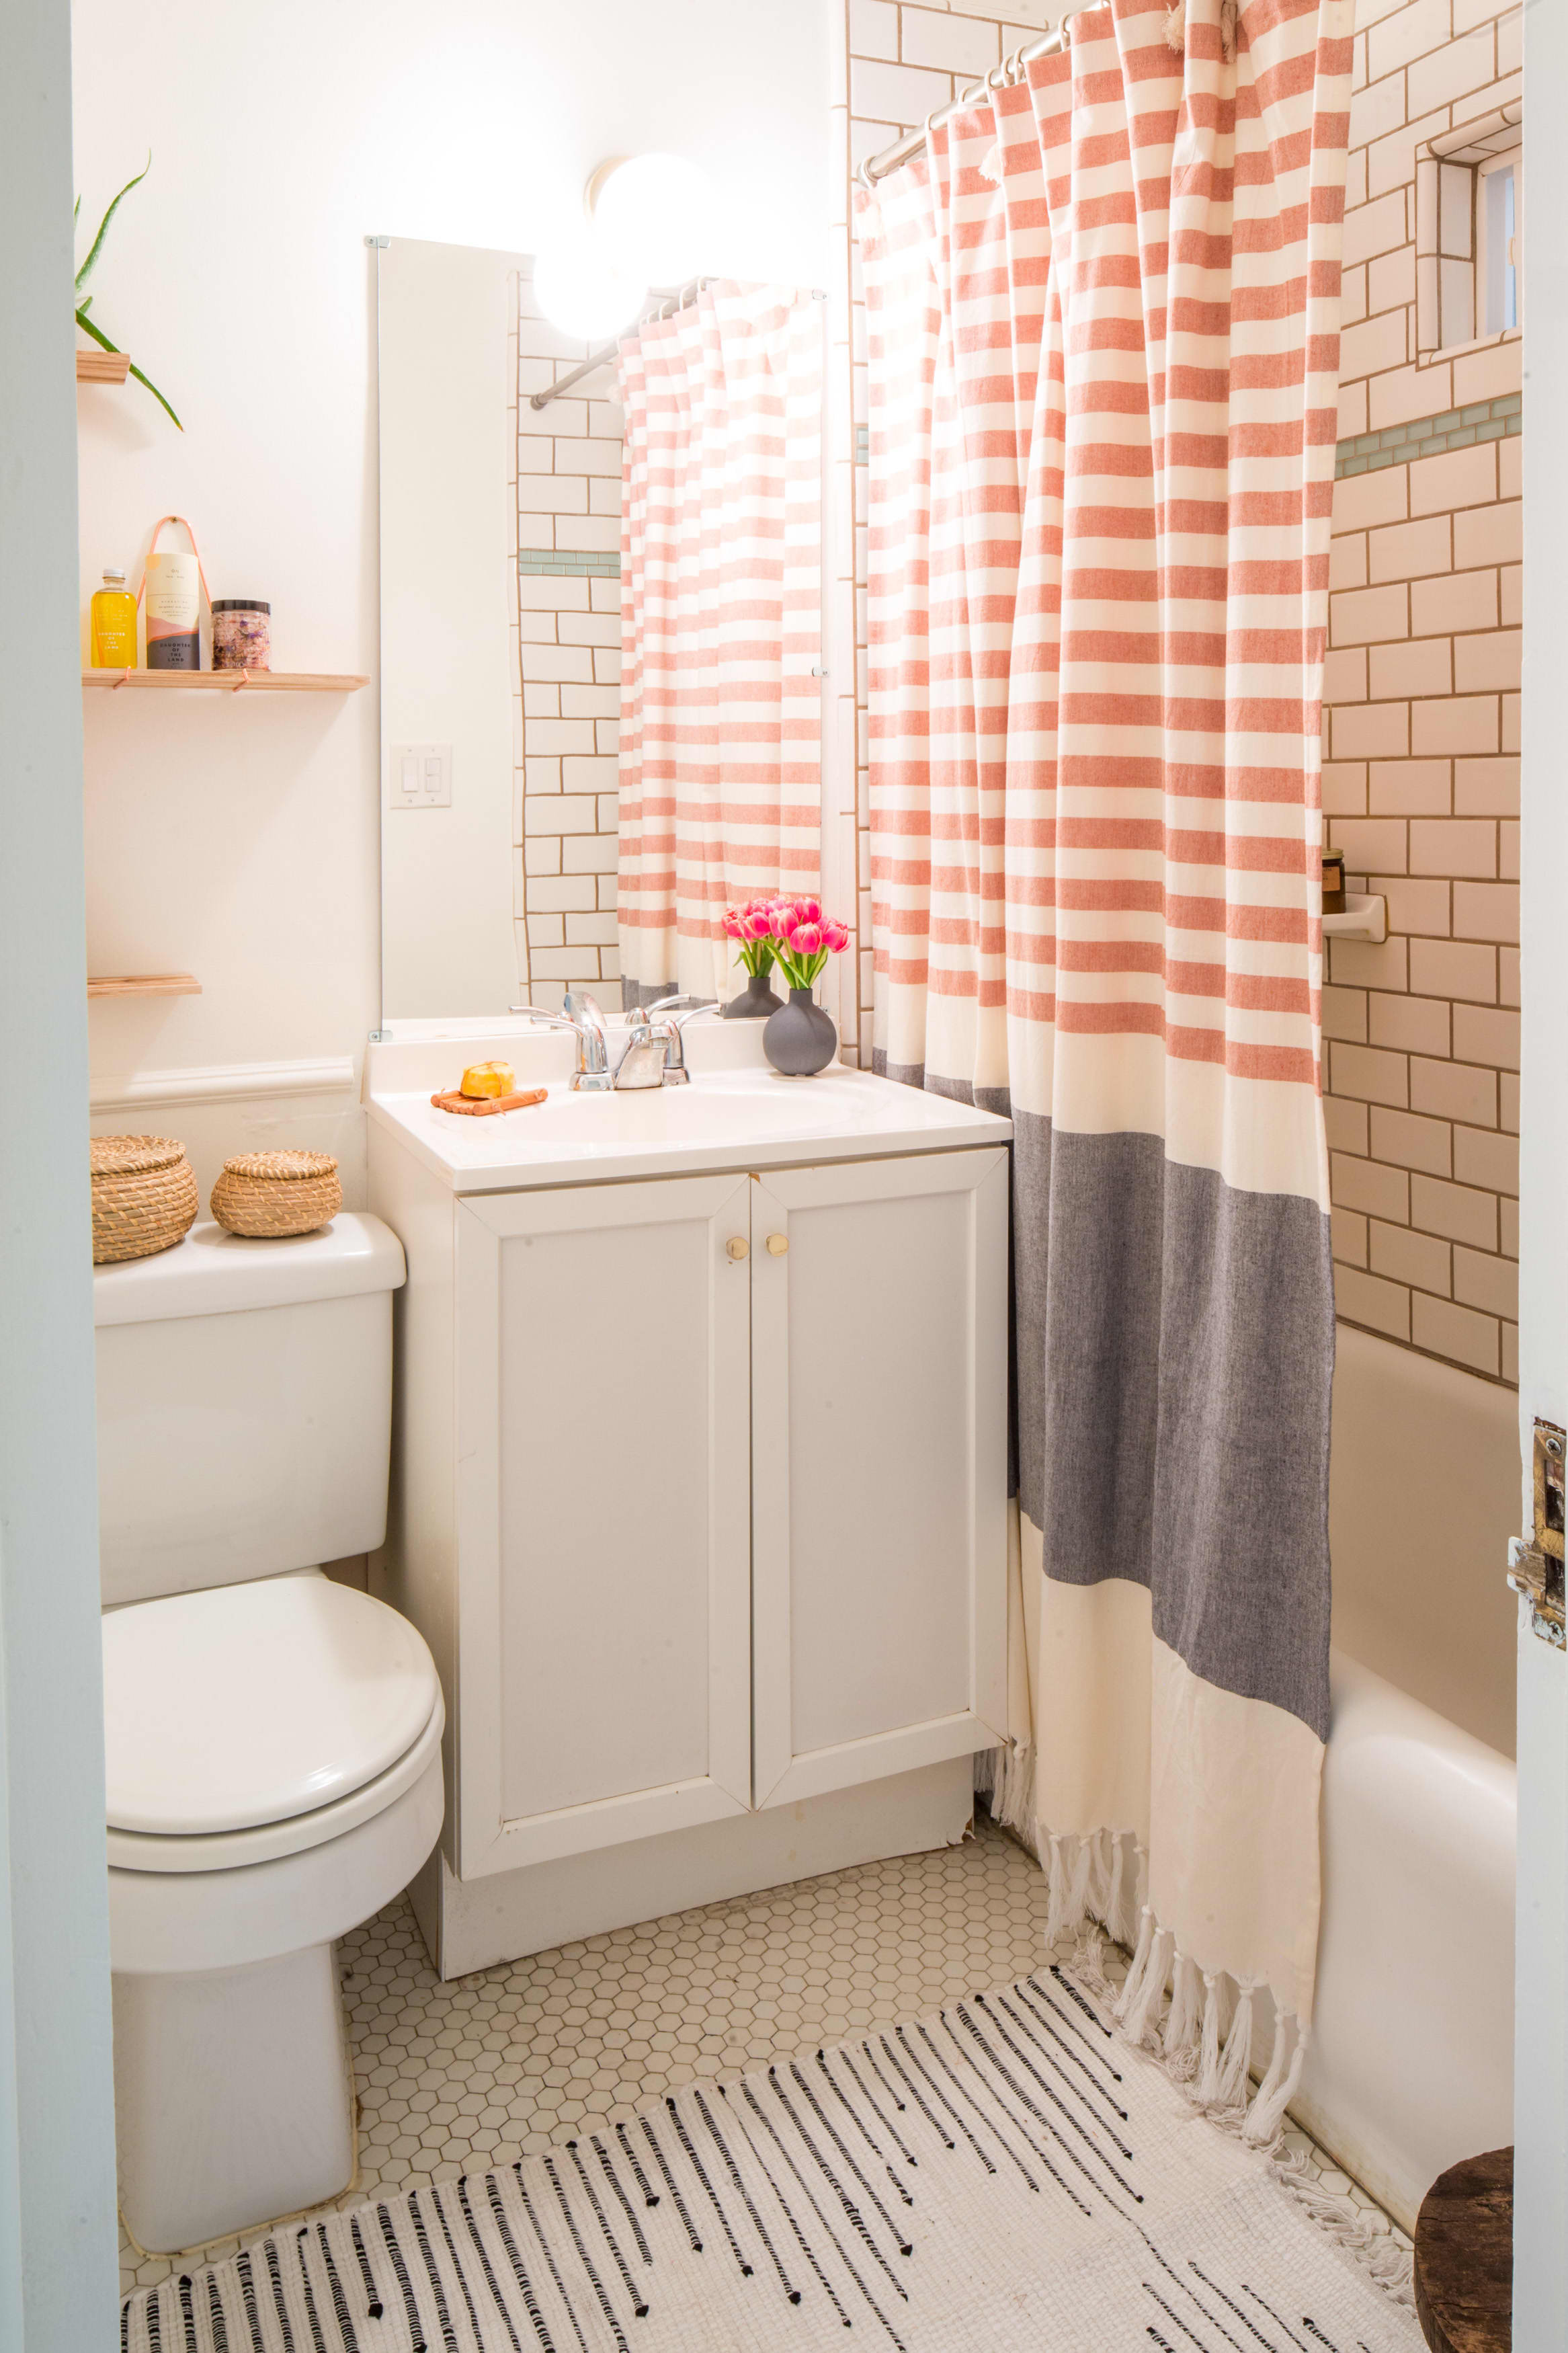 60 Best Small Bathroom Decorating Ideas - Tiny Bathroom Layout & Decor Tips  | Apartment Therapy